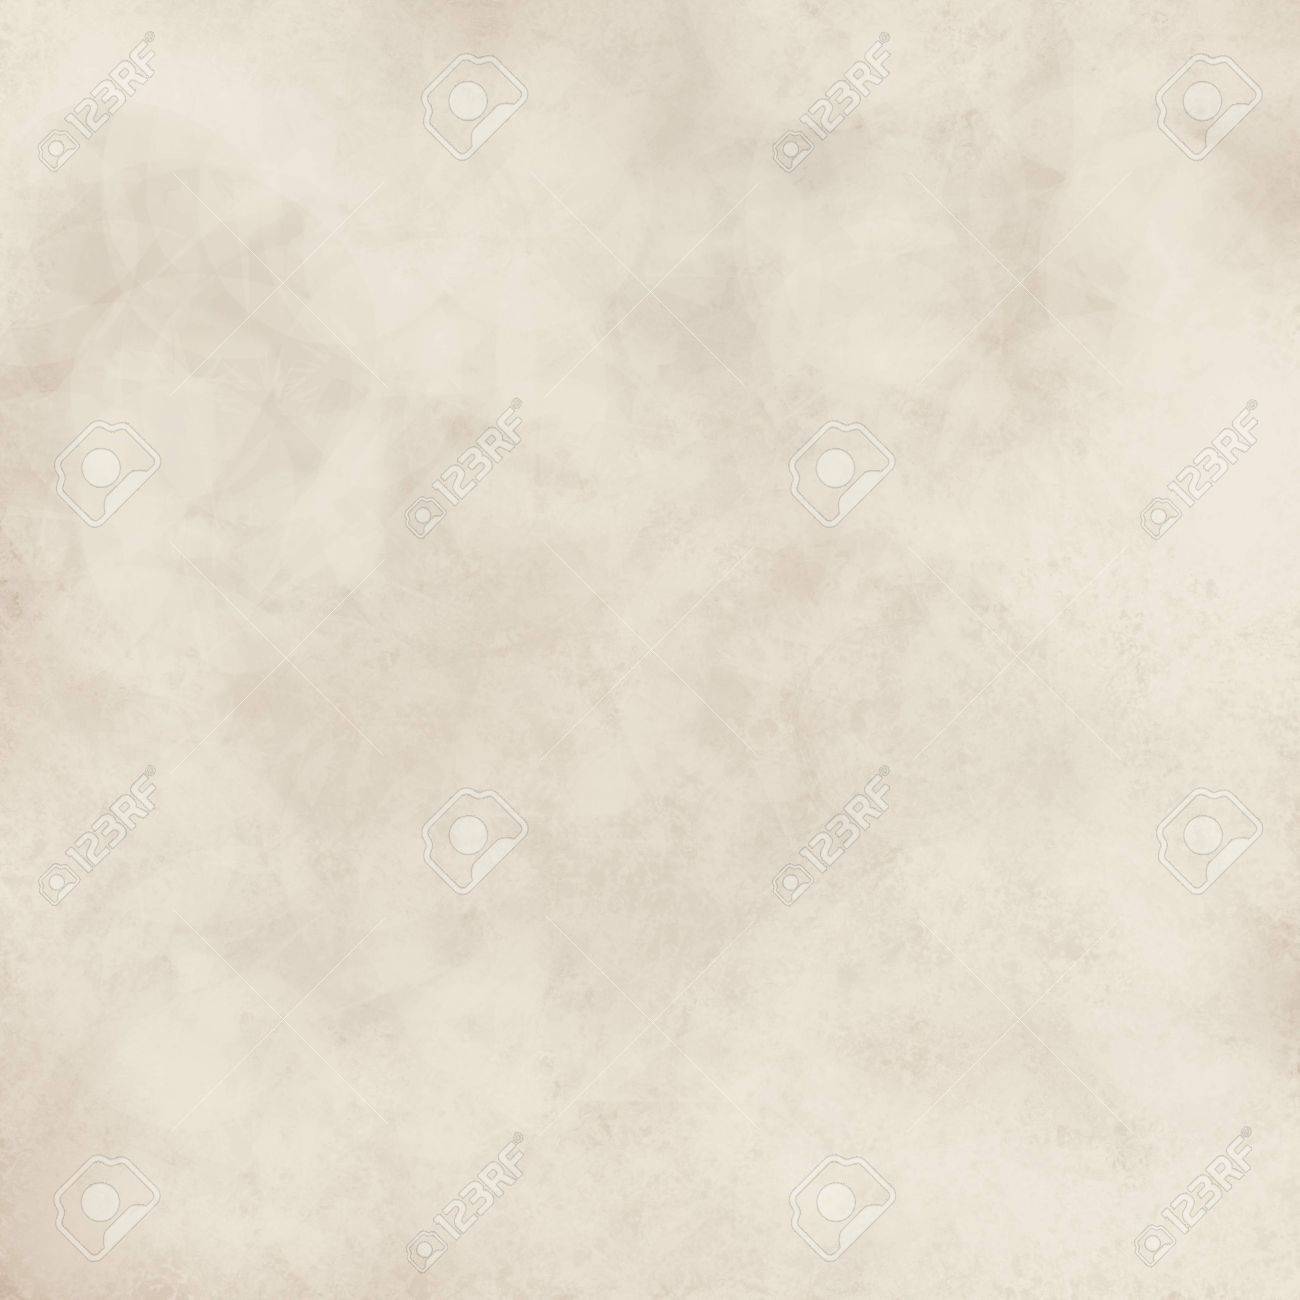 Old Vintage Textured Paper Background With Faint Bokeh Lights